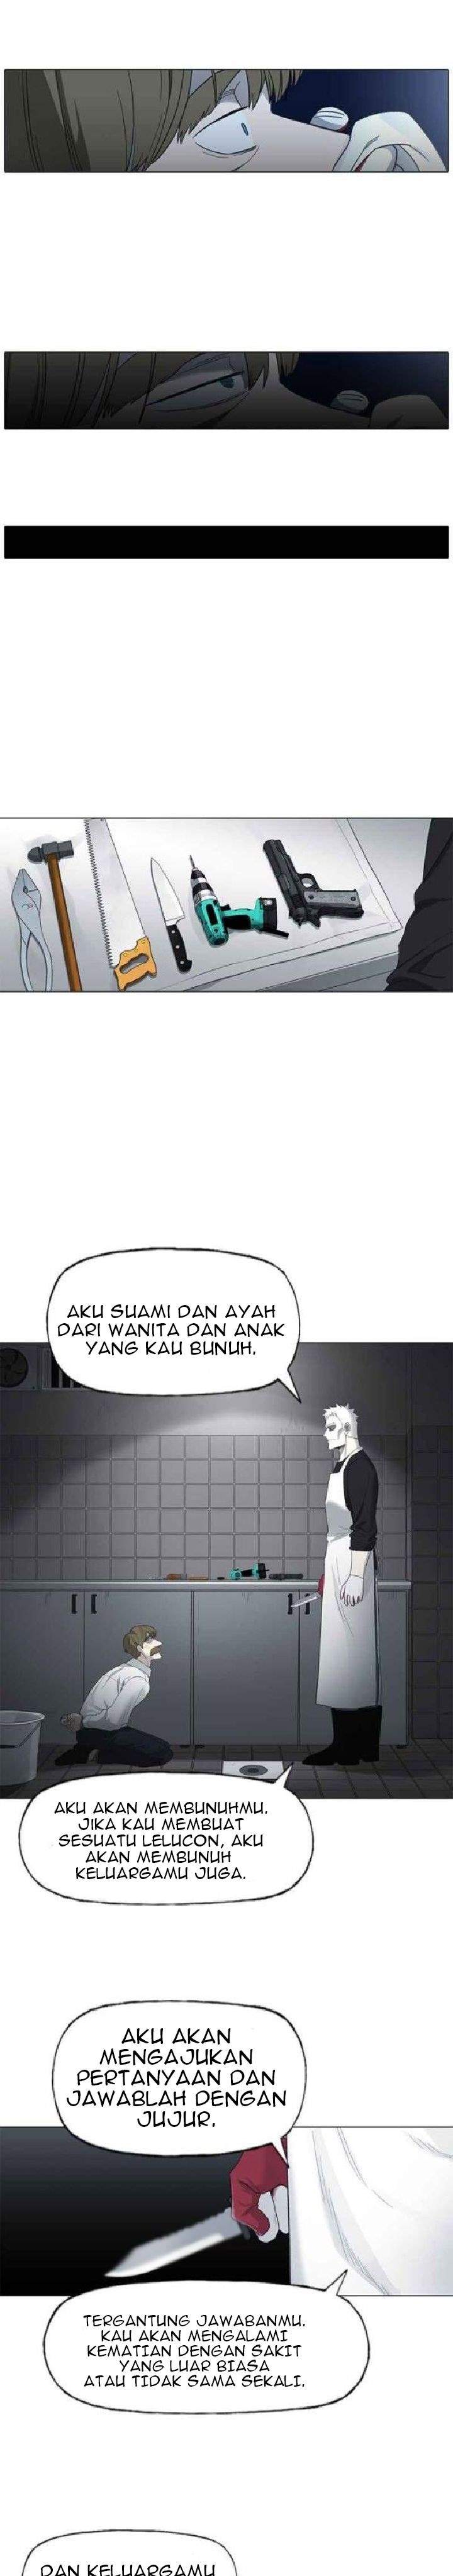 The Boxer Chapter 87